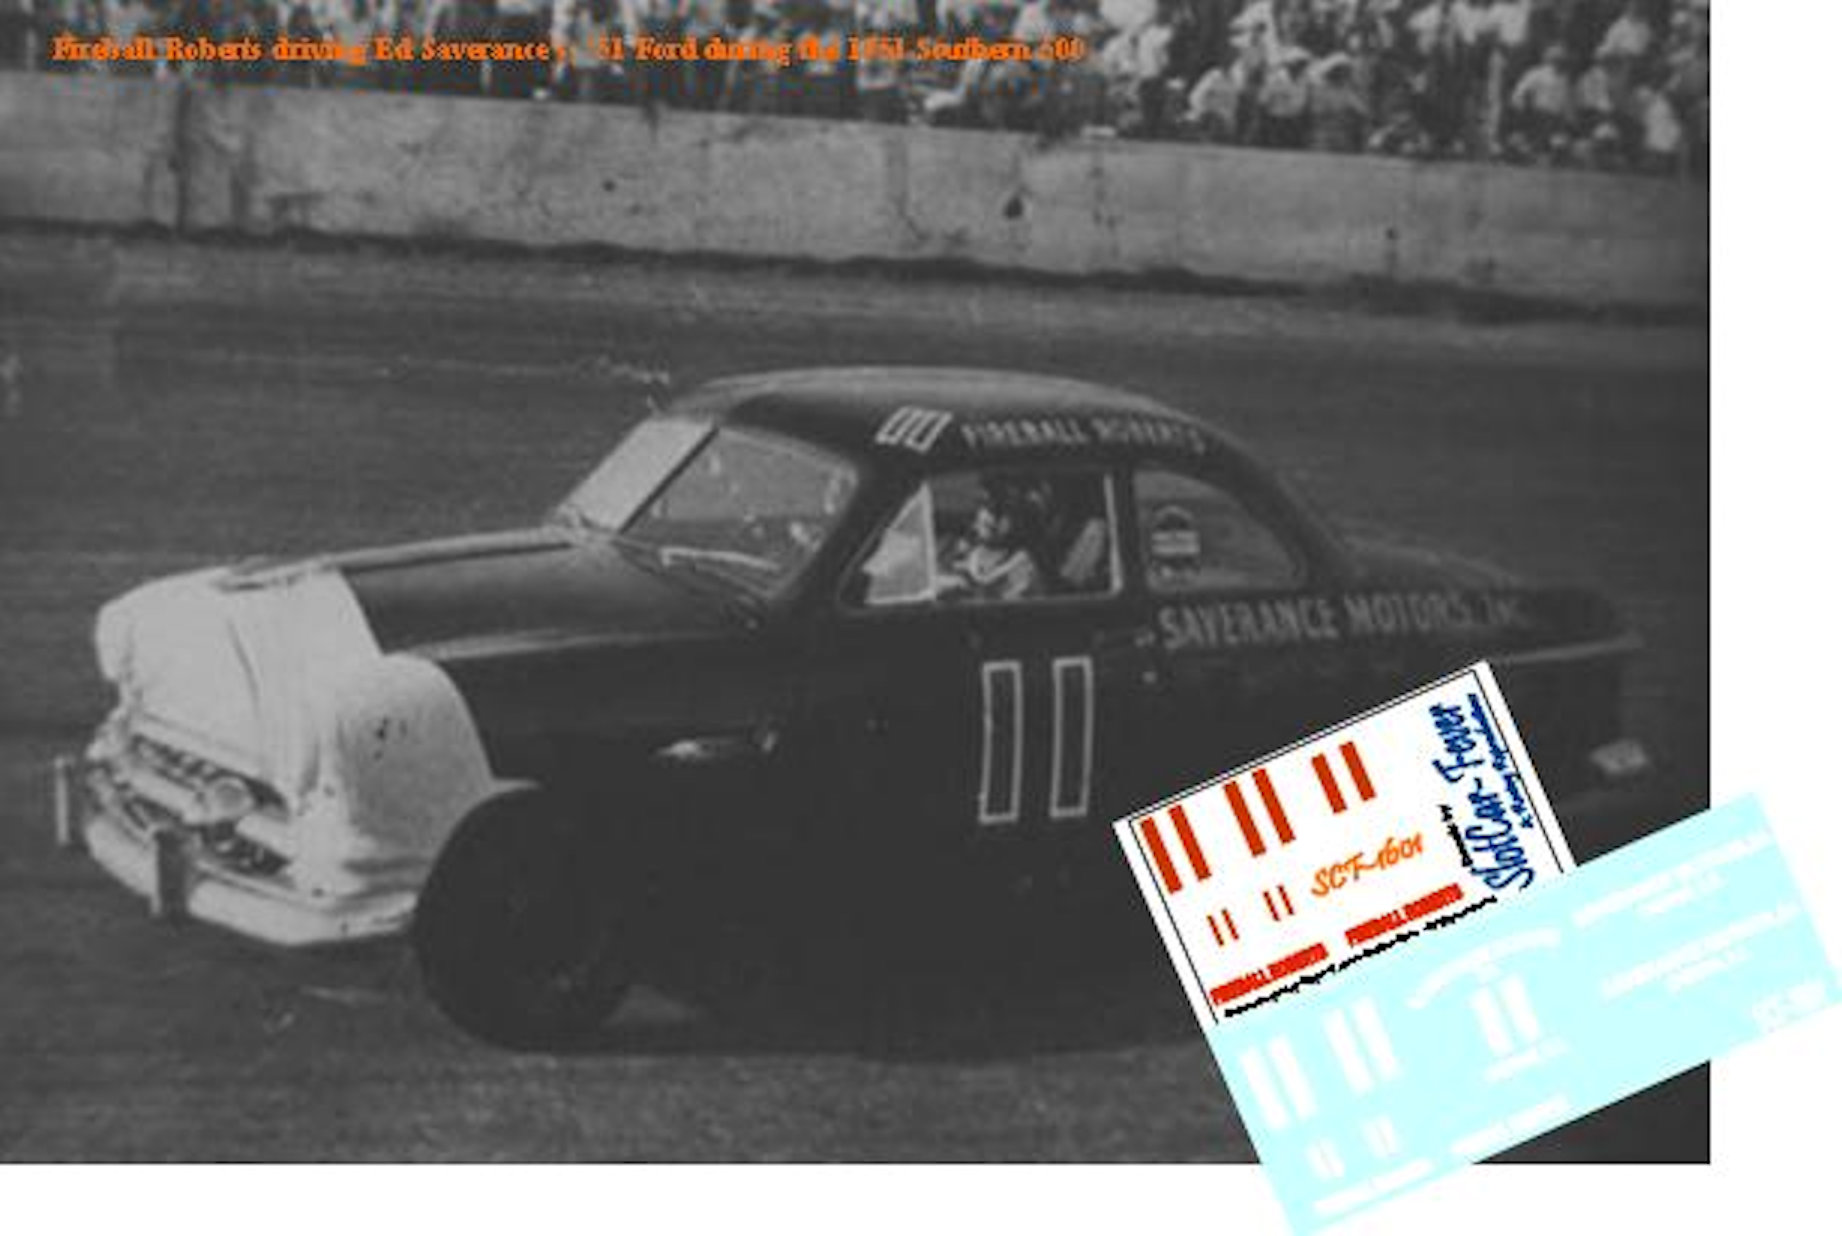 SCF1601-C #11 Fireball Roberts driving Ed Saverance's, '51 Ford during the 1951 Southern 500